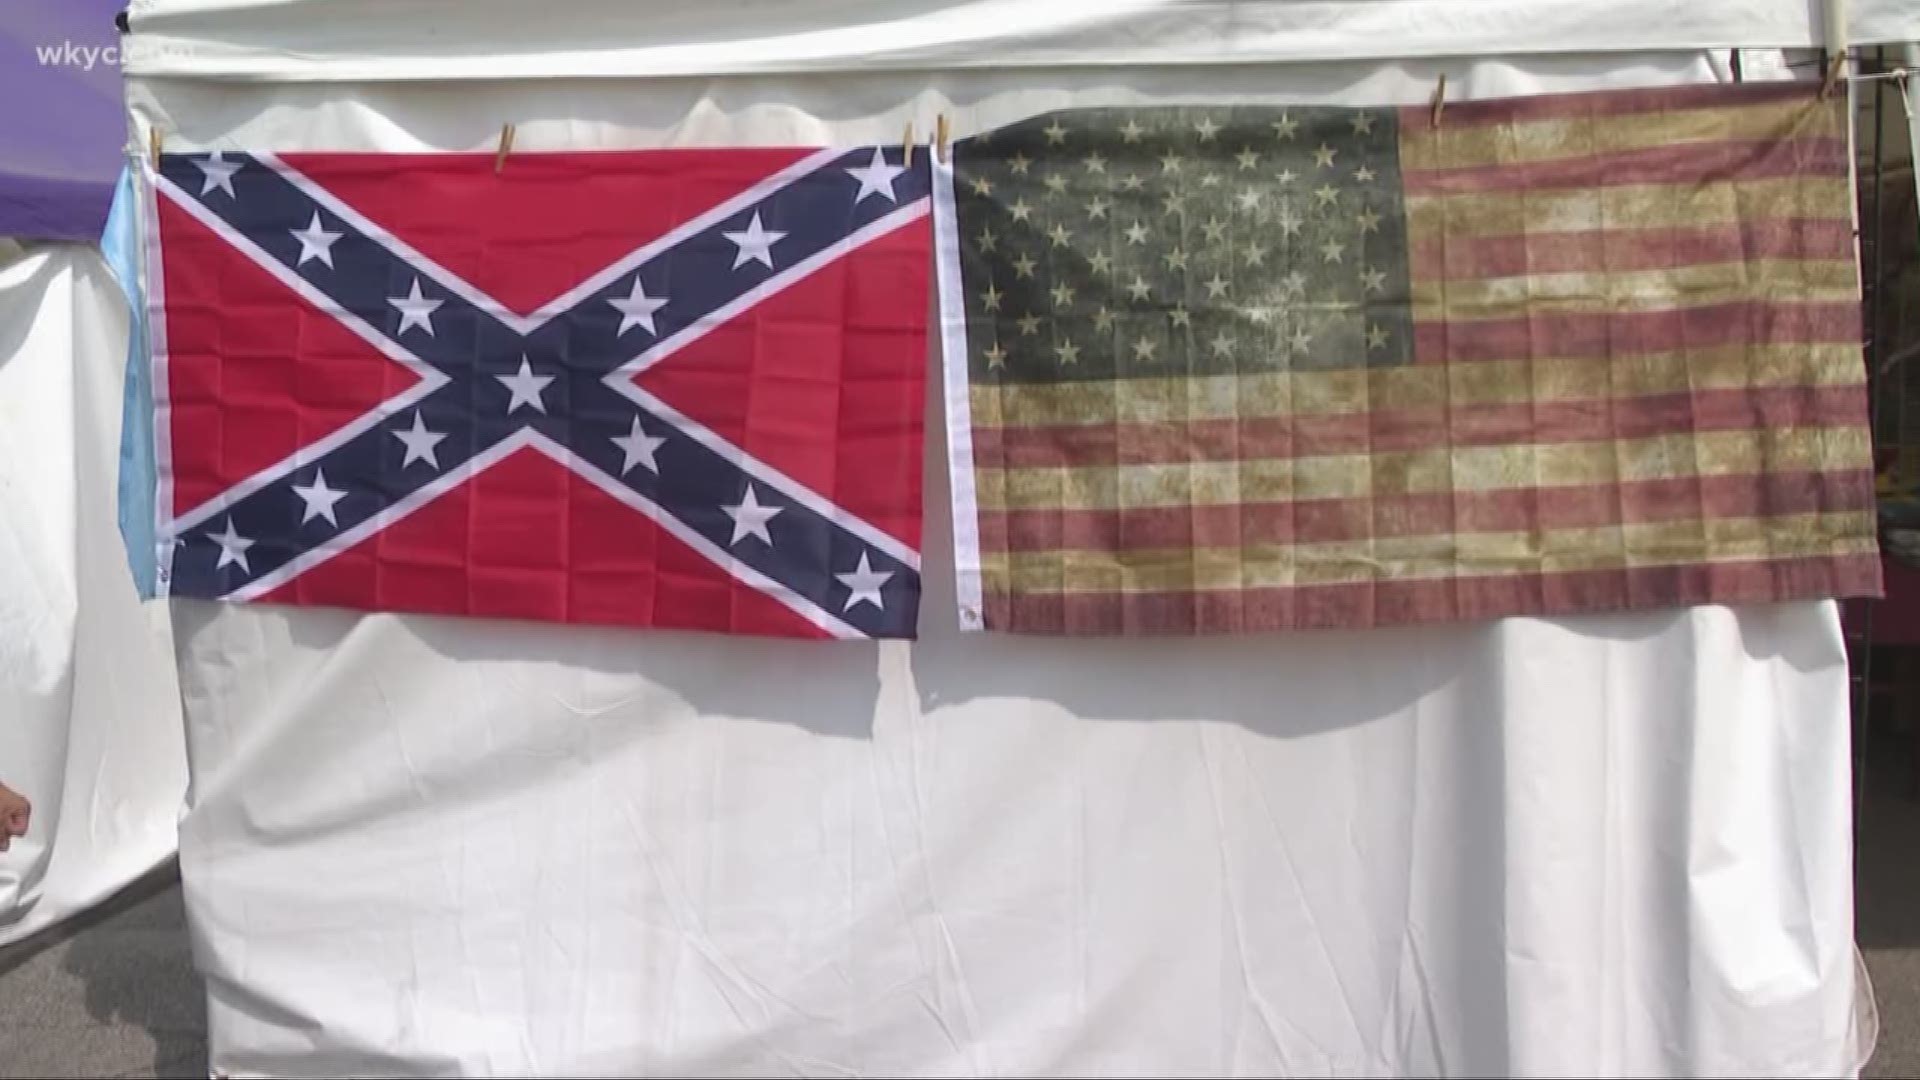 In the past, groups have protested the continued sale of the flag, which many feel is a symbol of racism due to its associations with southern secession during the Civil War. Fair officials say it is a matter of free speech.